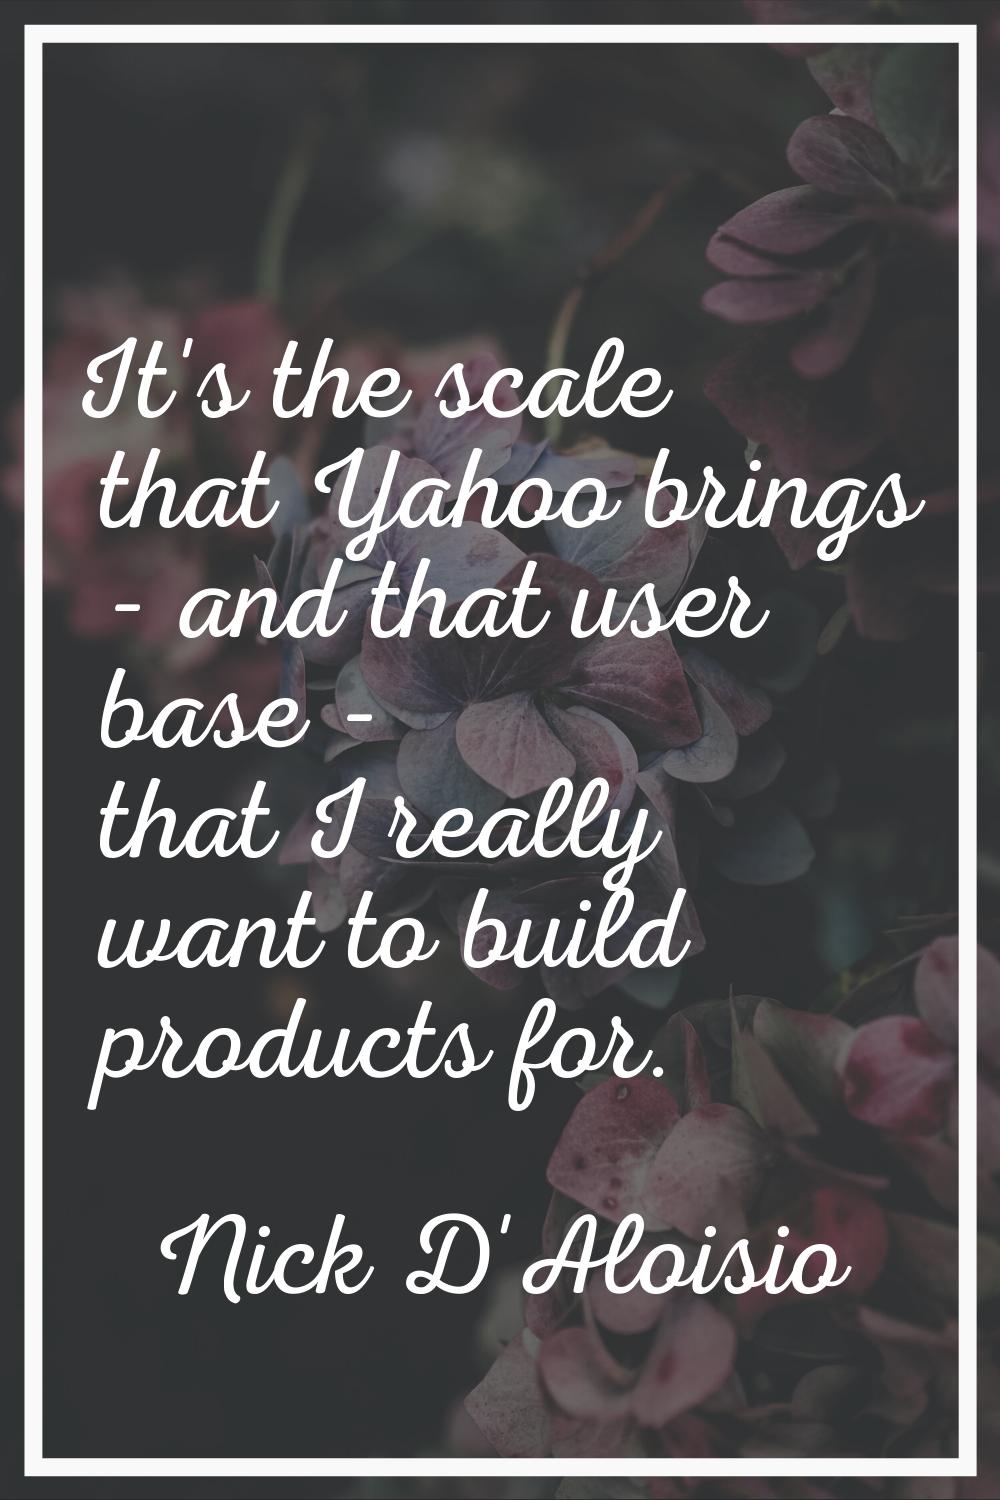 It's the scale that Yahoo brings - and that user base - that I really want to build products for.